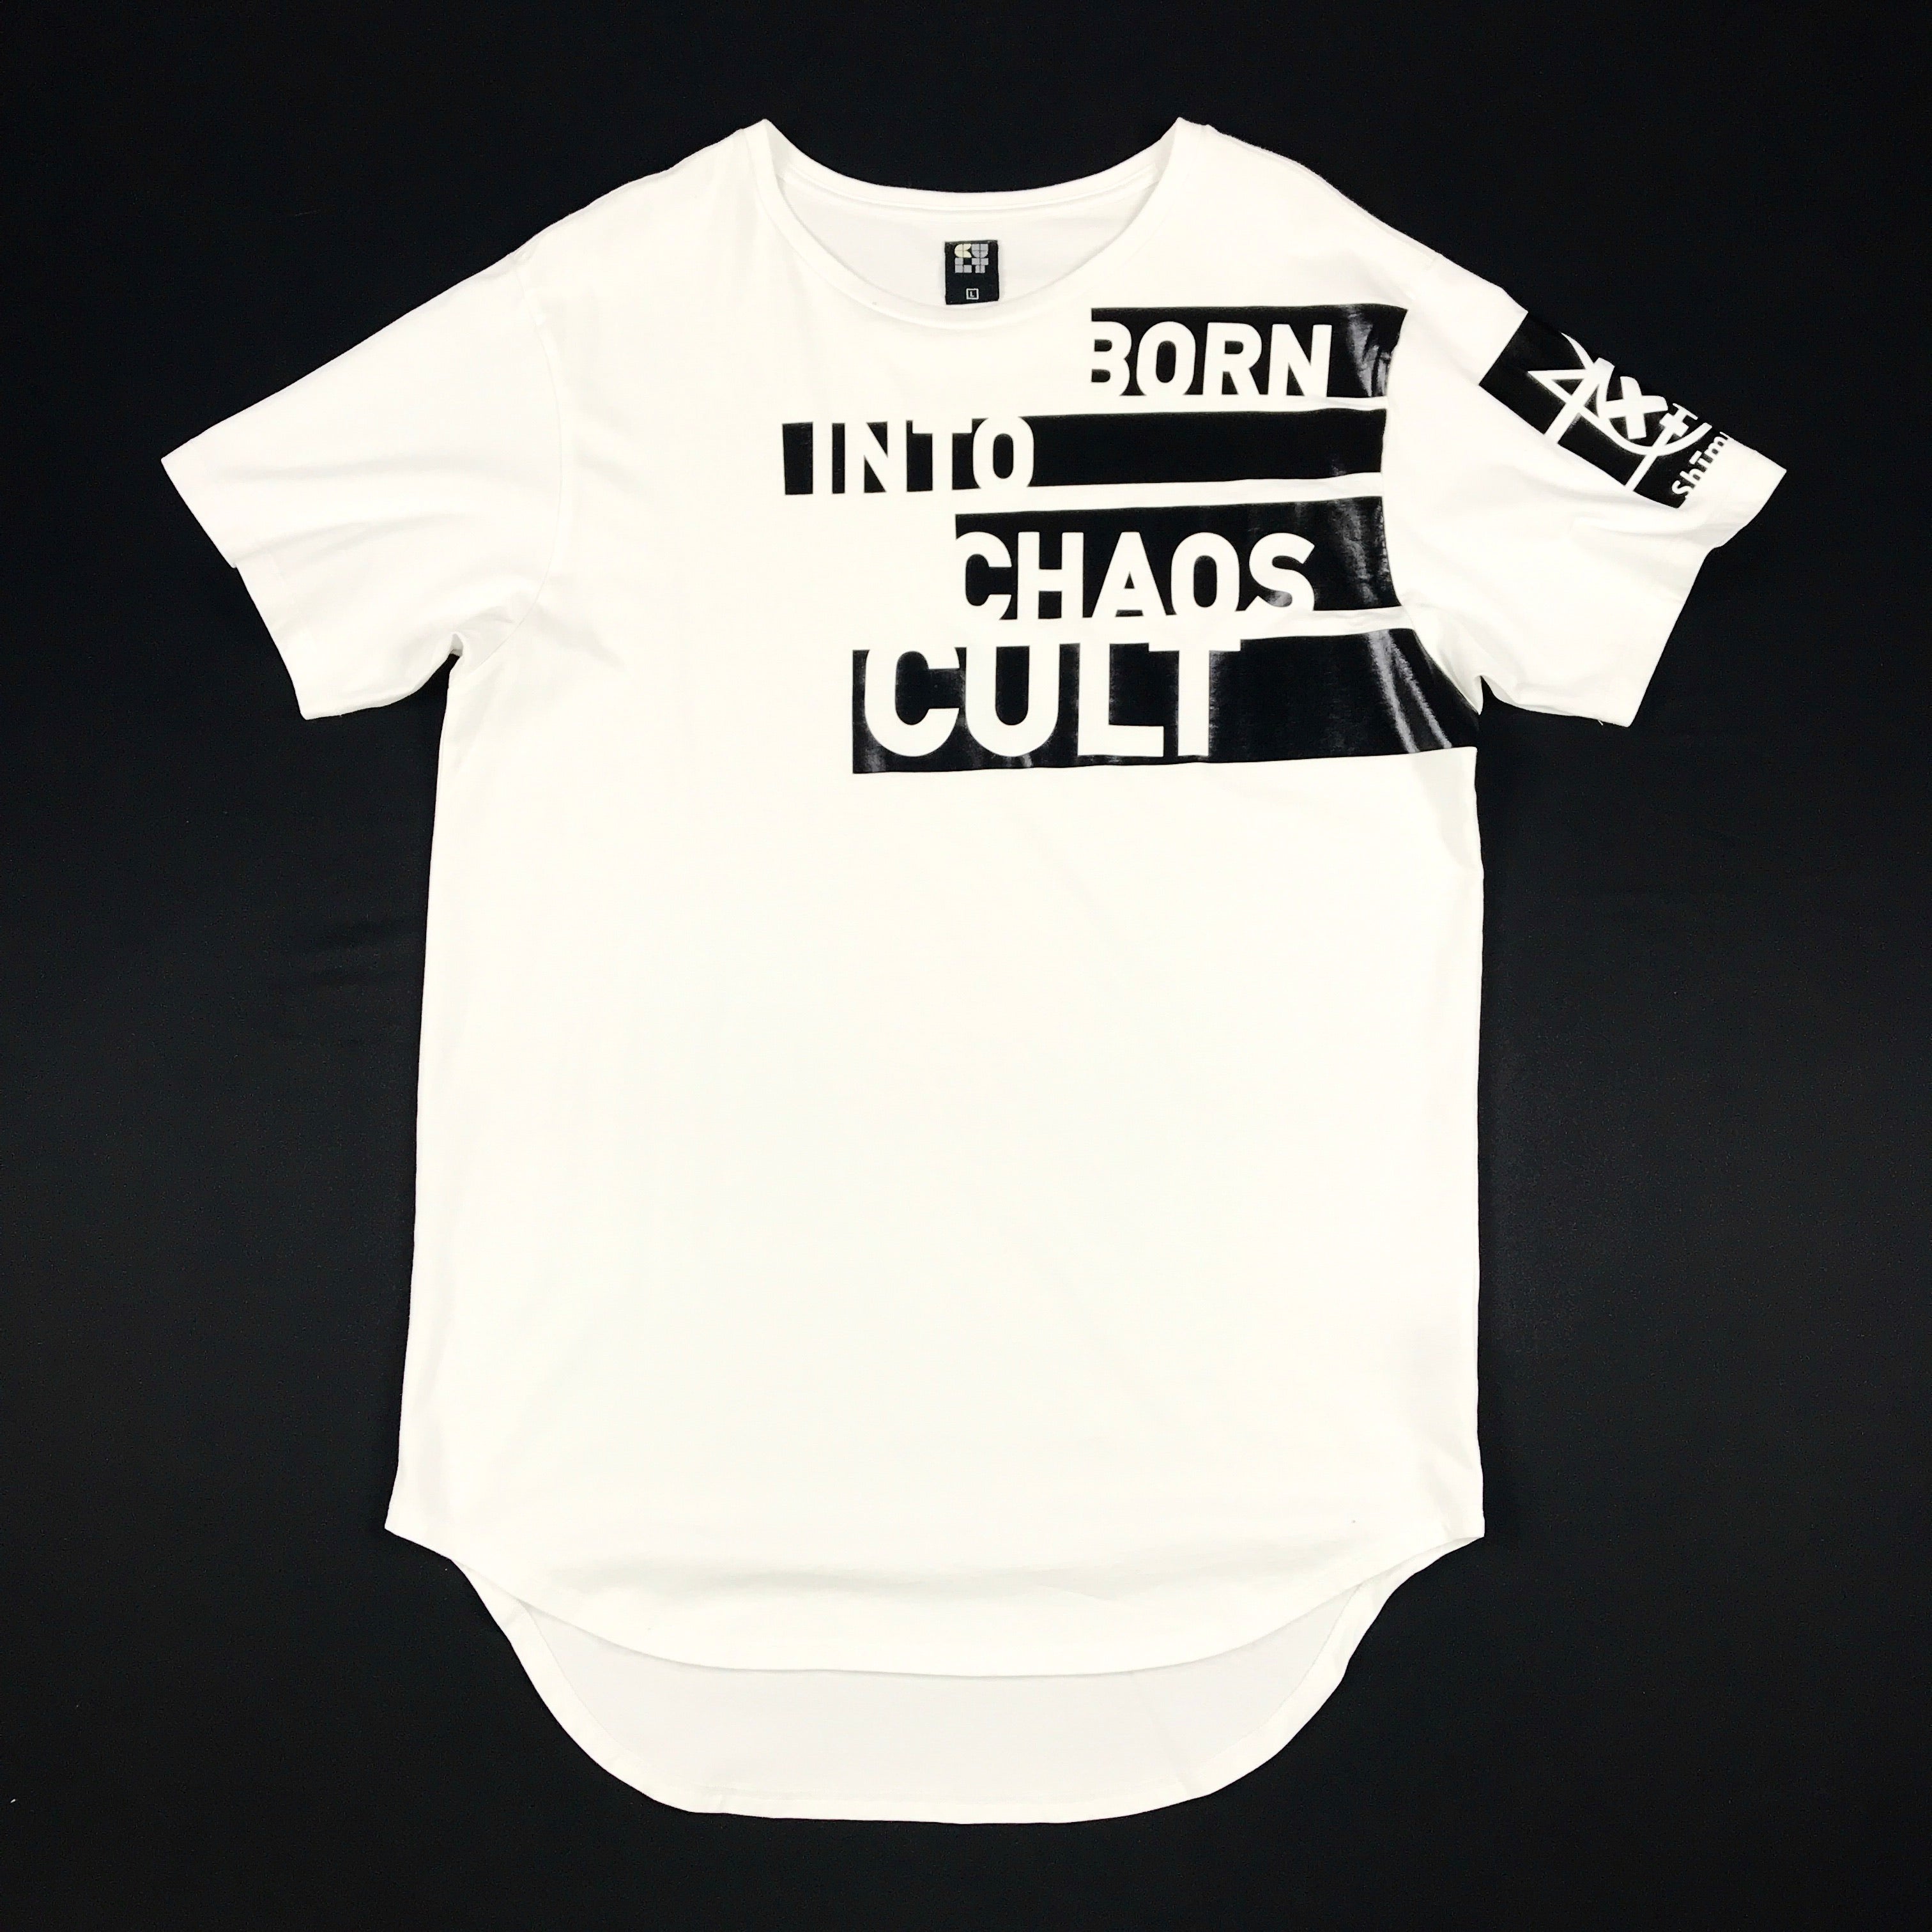 Cult Born into Chaos tee in white